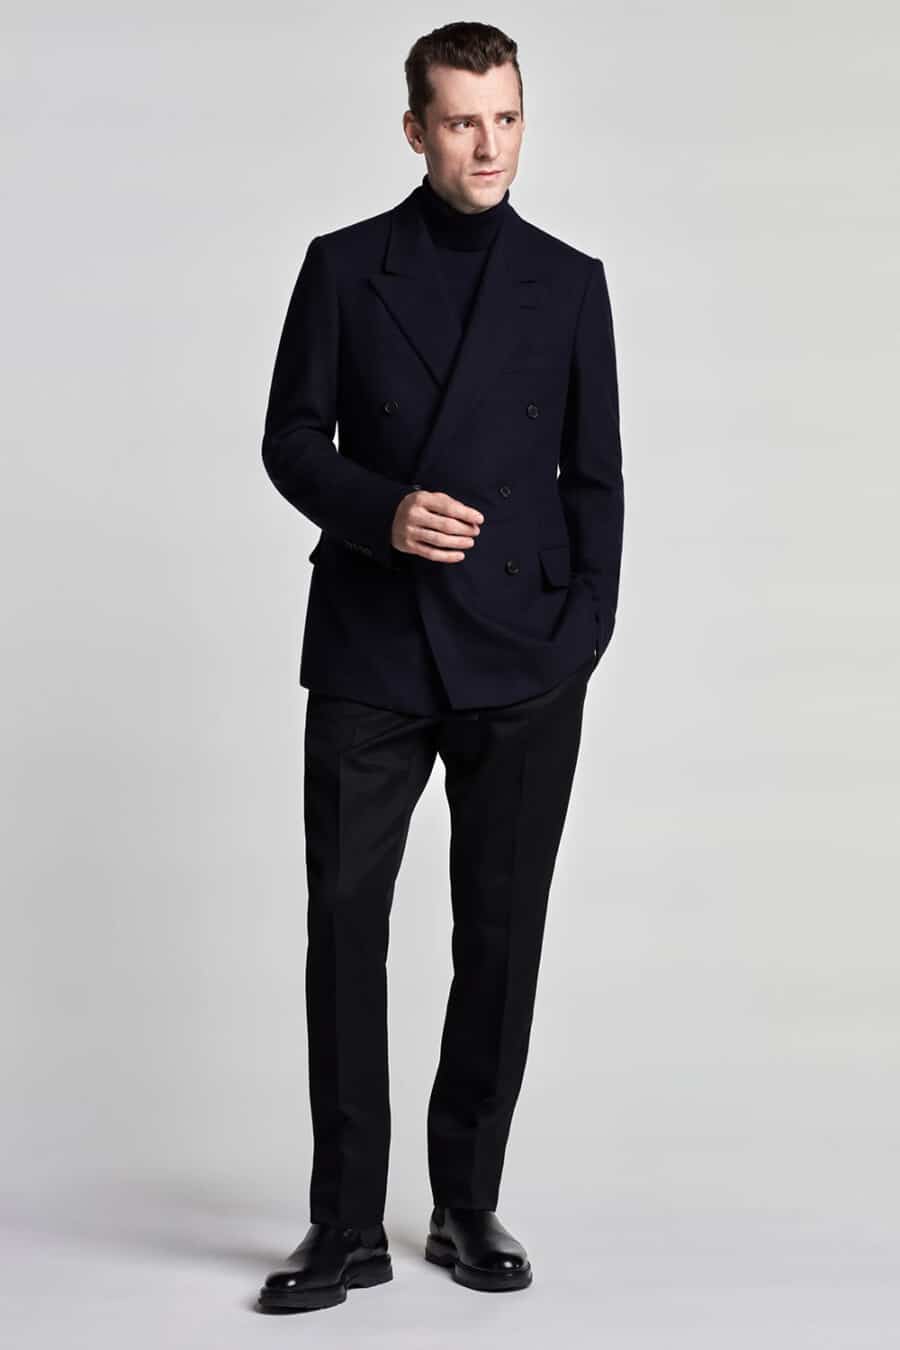 Men's navy double-breasted suit, navy turtleneck and black leather Chelsea boots outfit